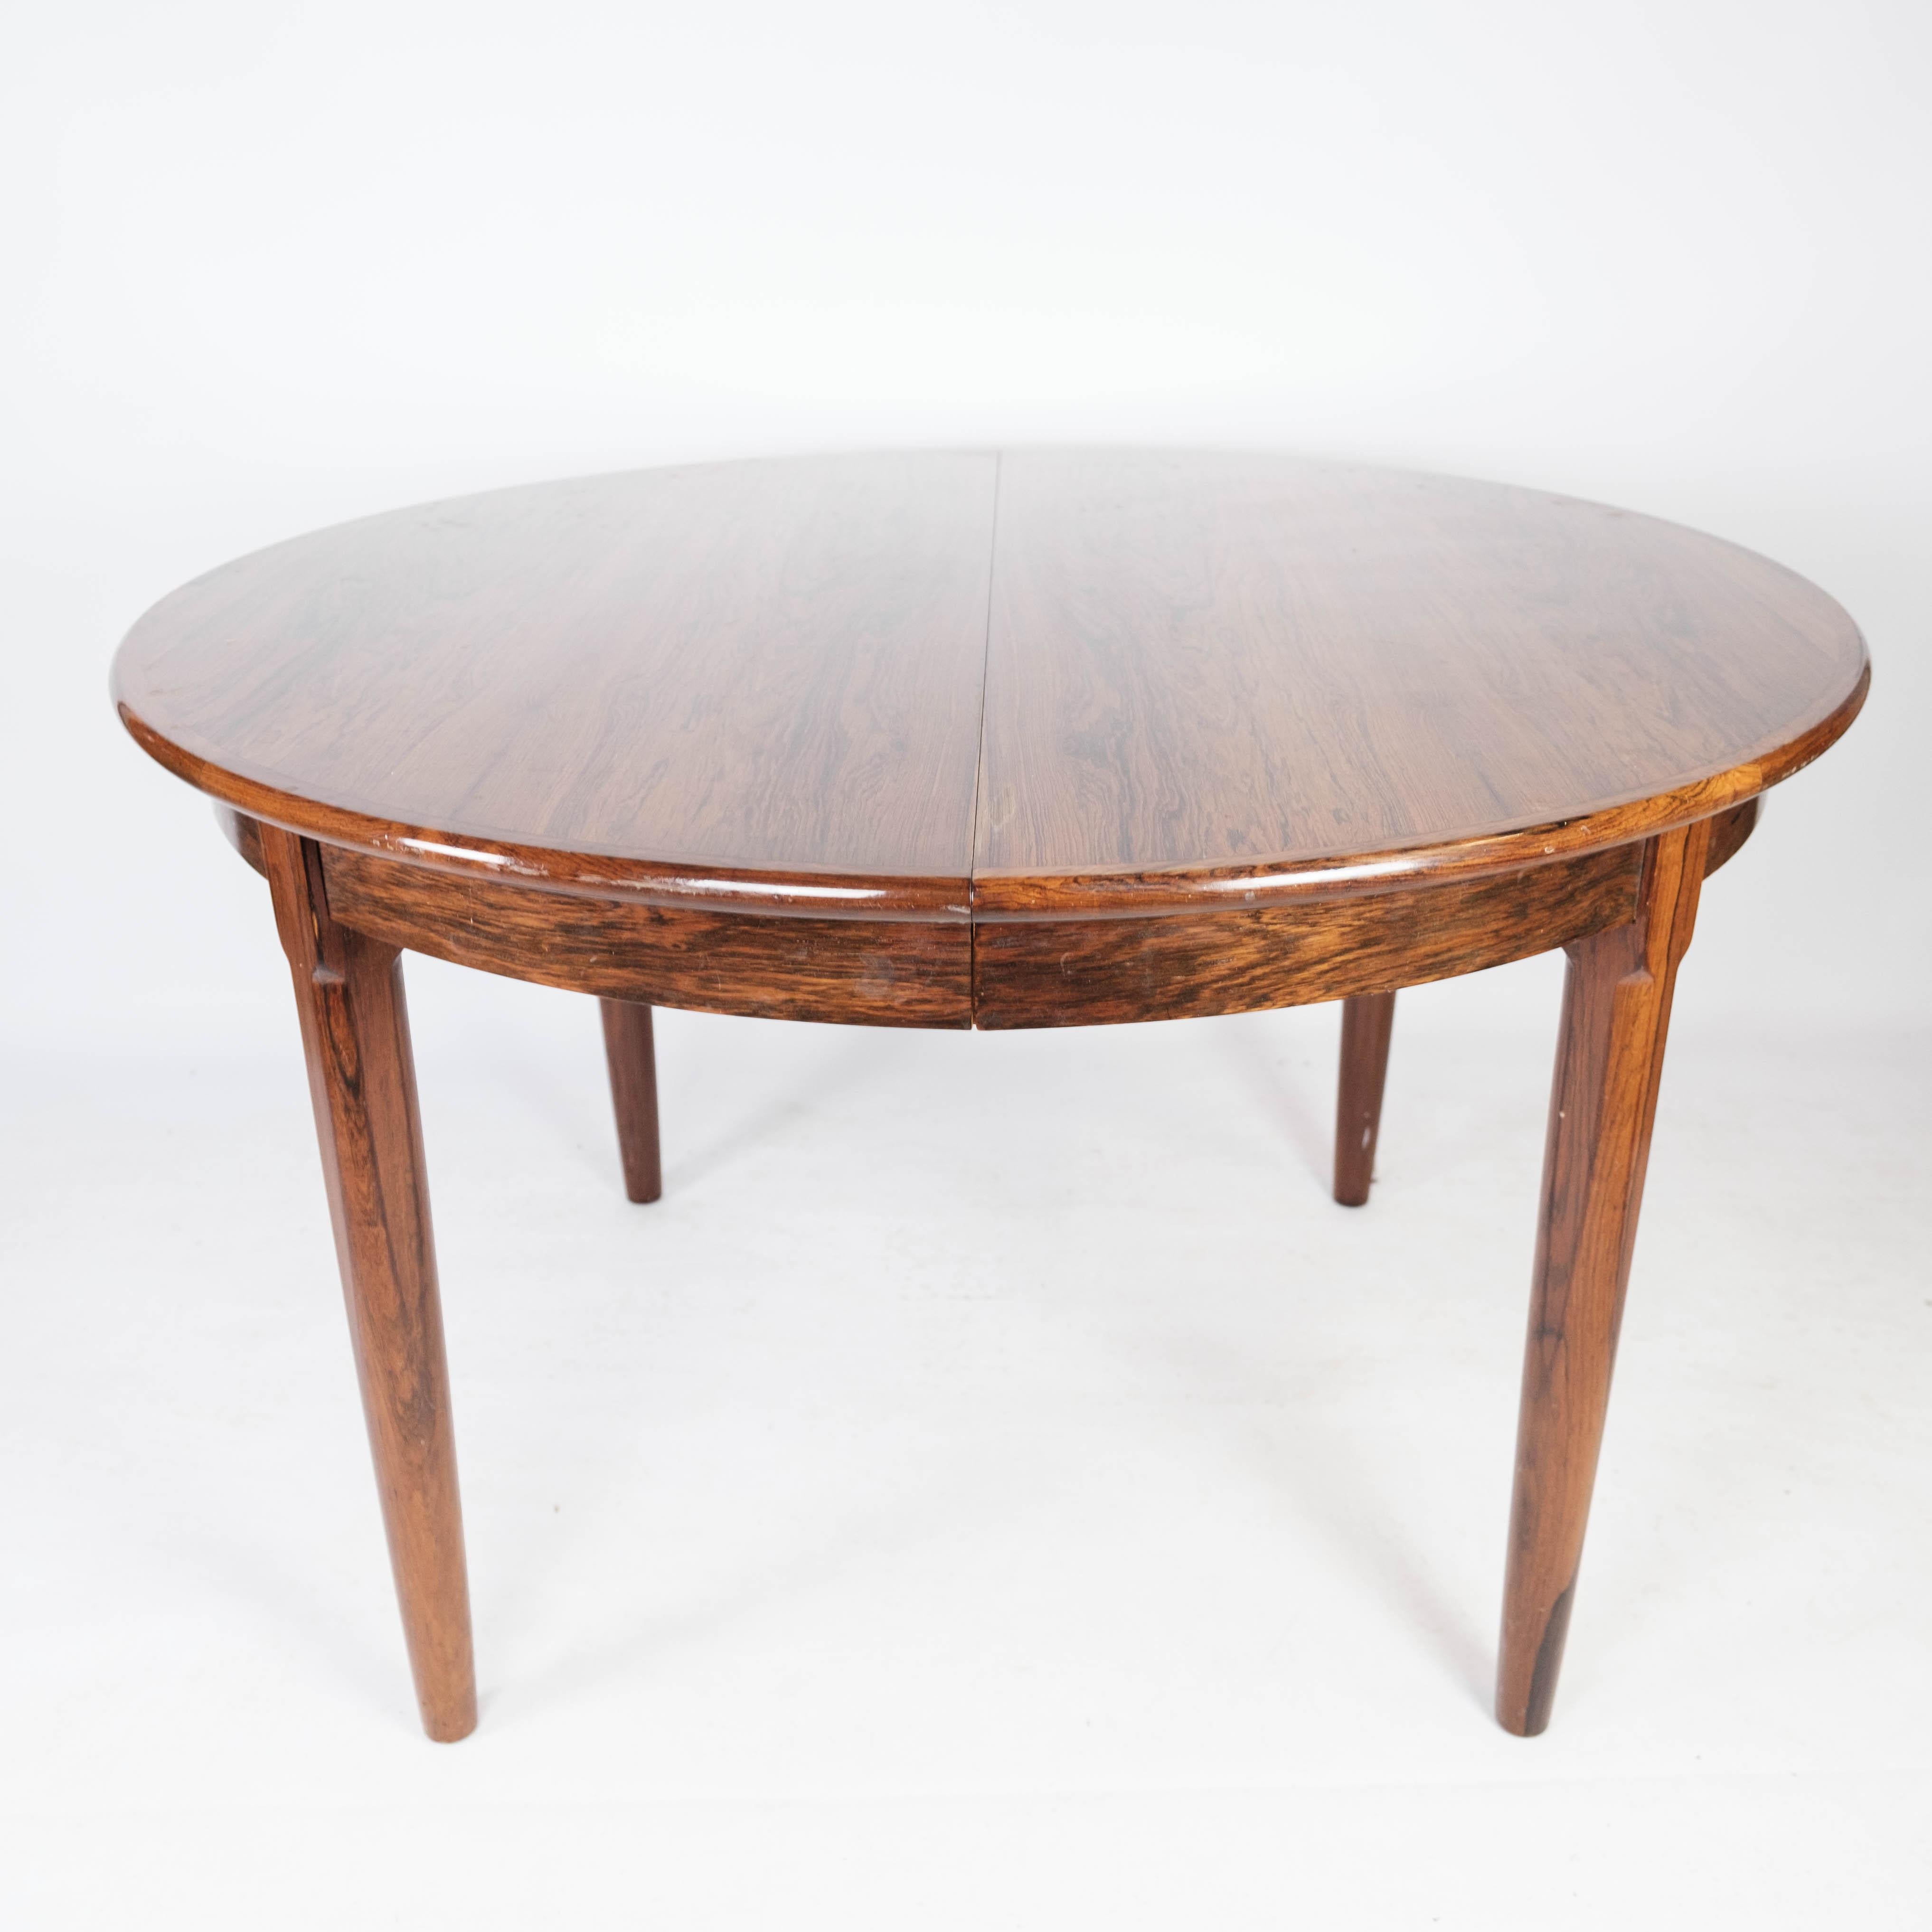 
This Danish-designed dining table from the 1960s, crafted from rosewood, epitomizes the era's fusion of elegant design and practicality.

With its rich tones and luxurious grain, the rosewood exudes a sense of warmth and sophistication, adding a